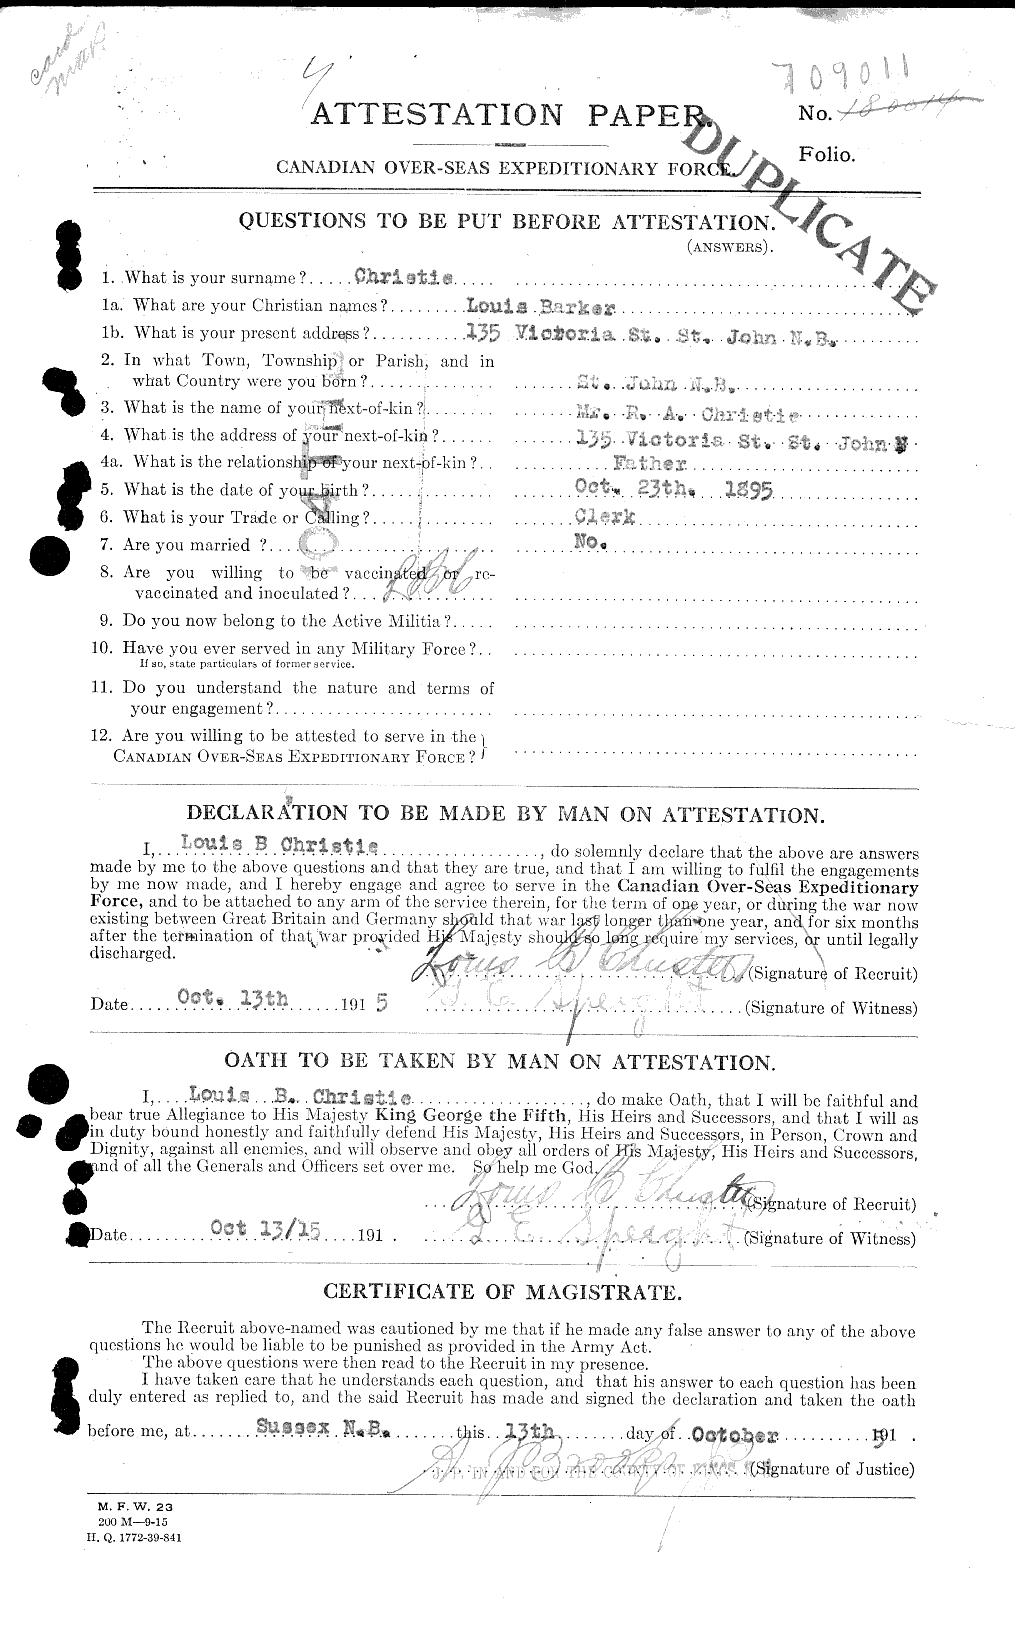 Personnel Records of the First World War - CEF 022028a